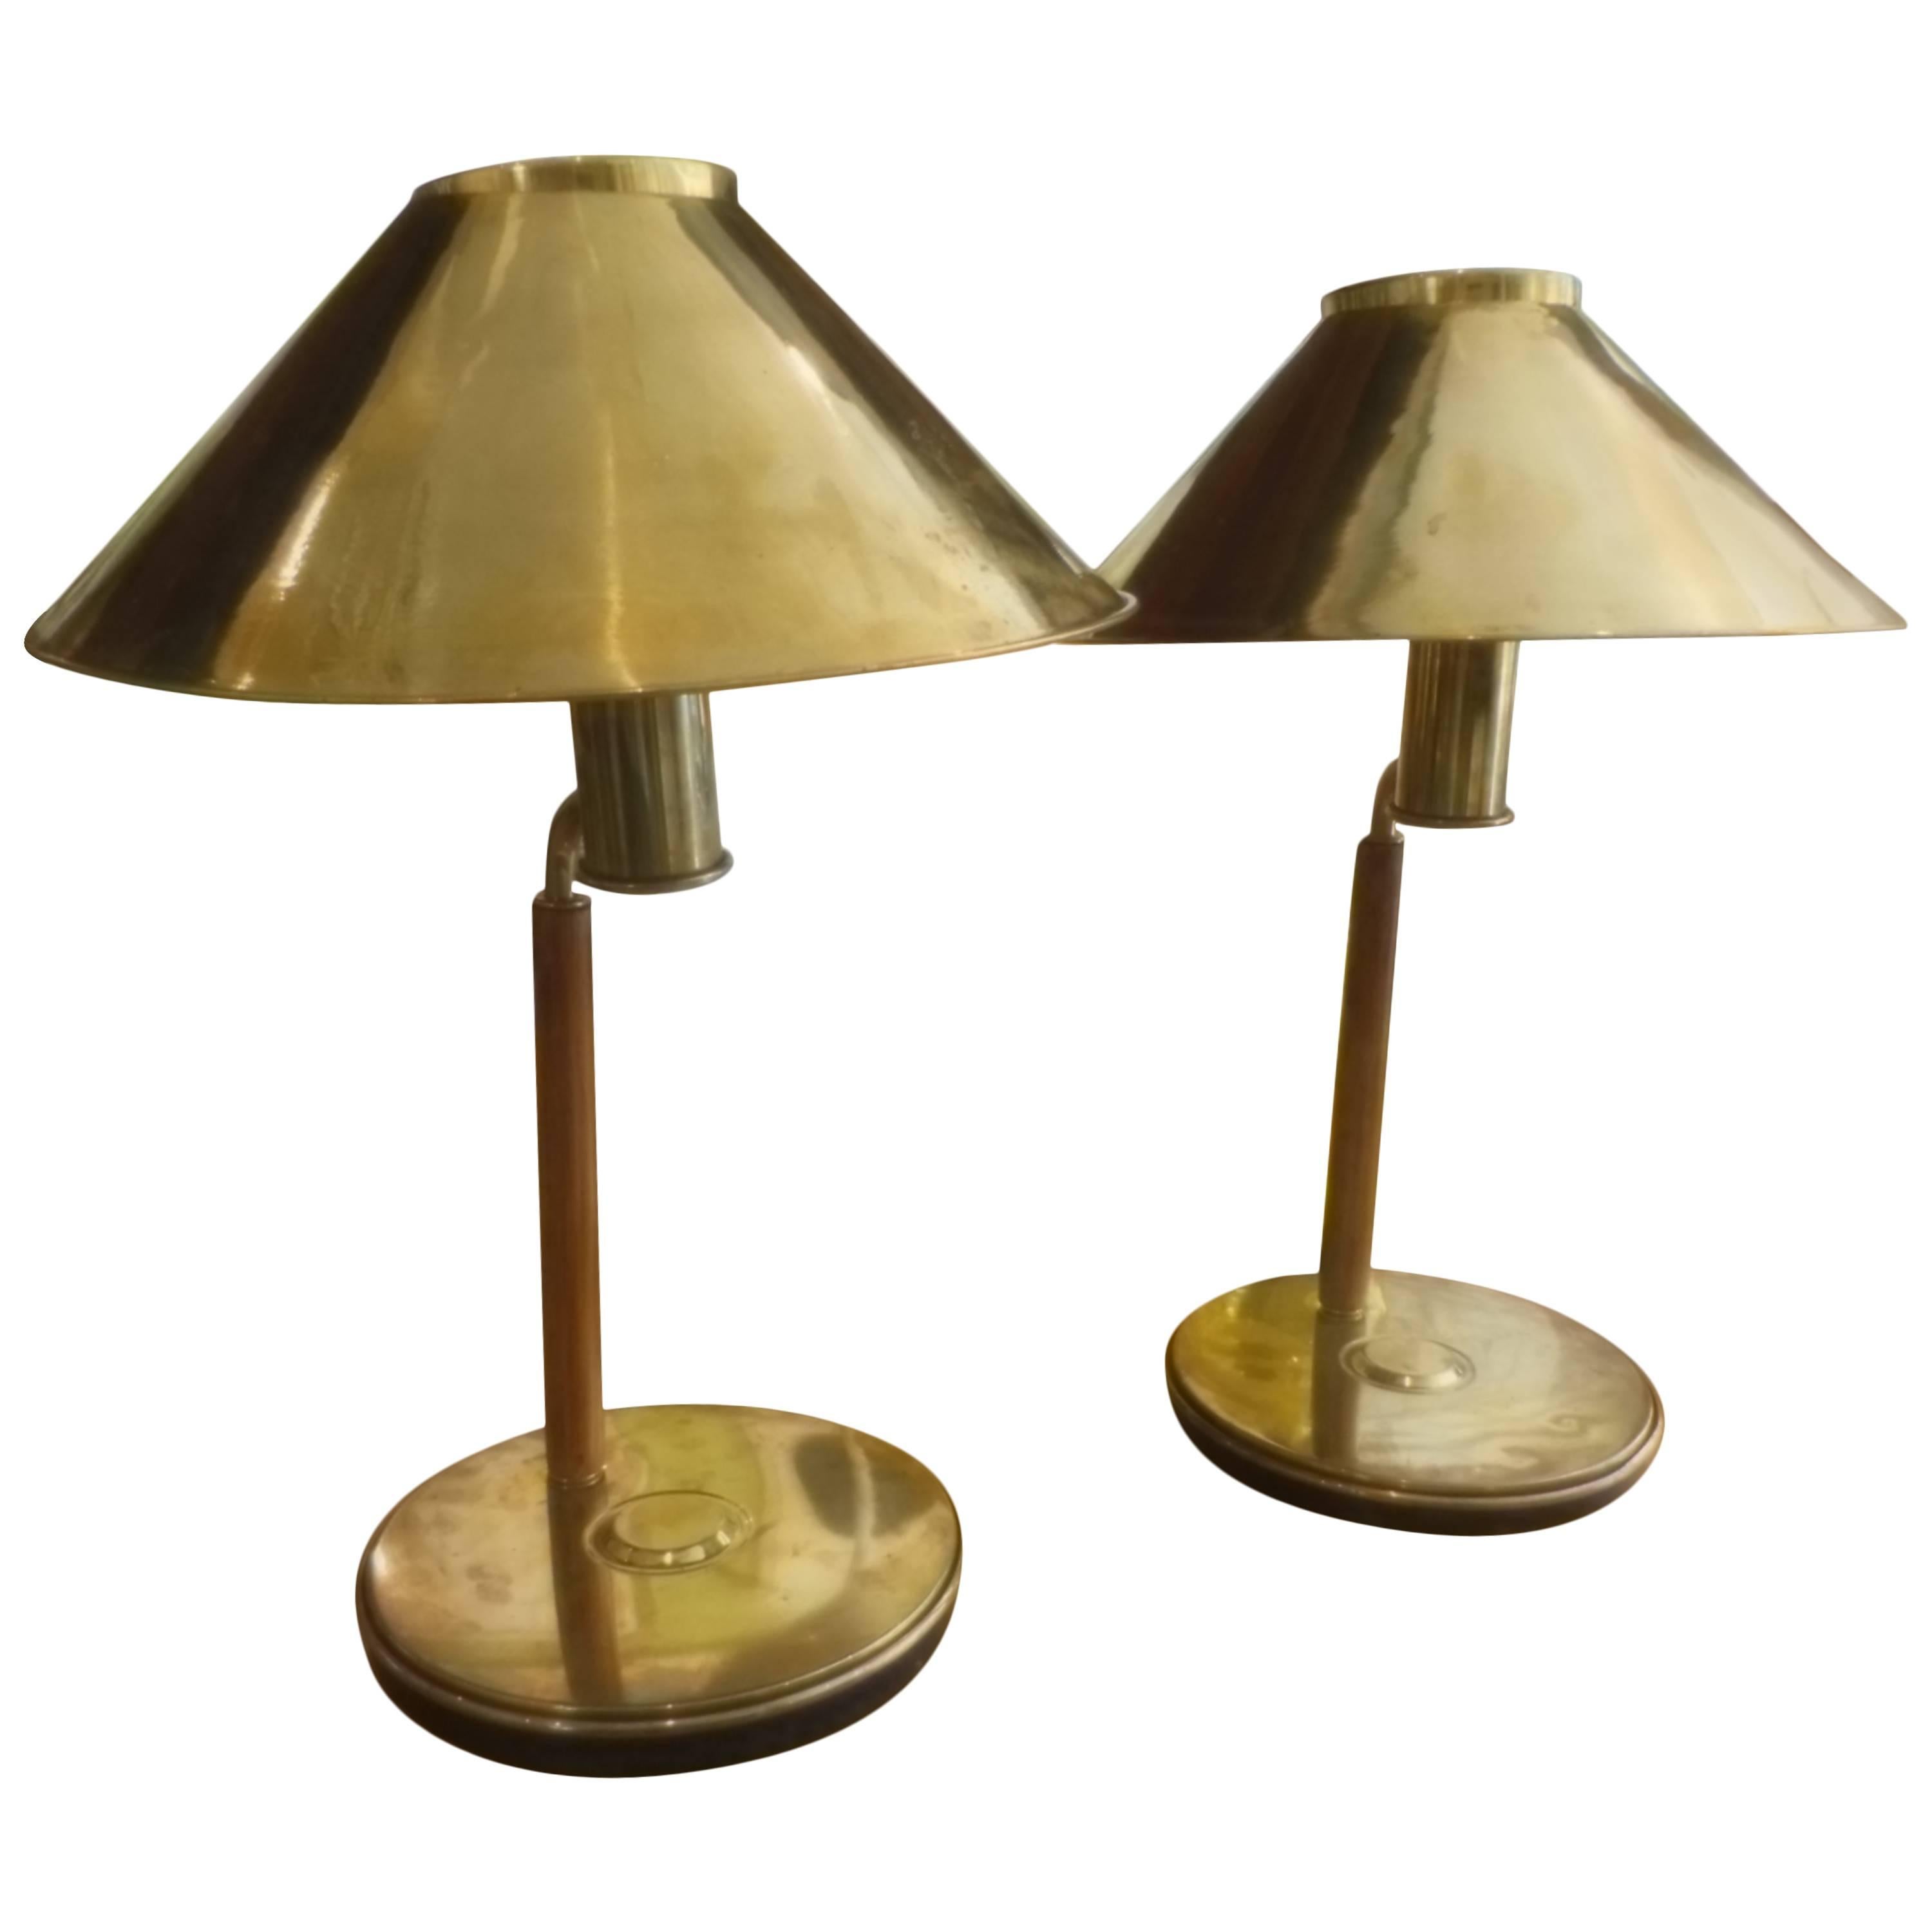 Pair of Brass and Walnut Ship's Table Lamps